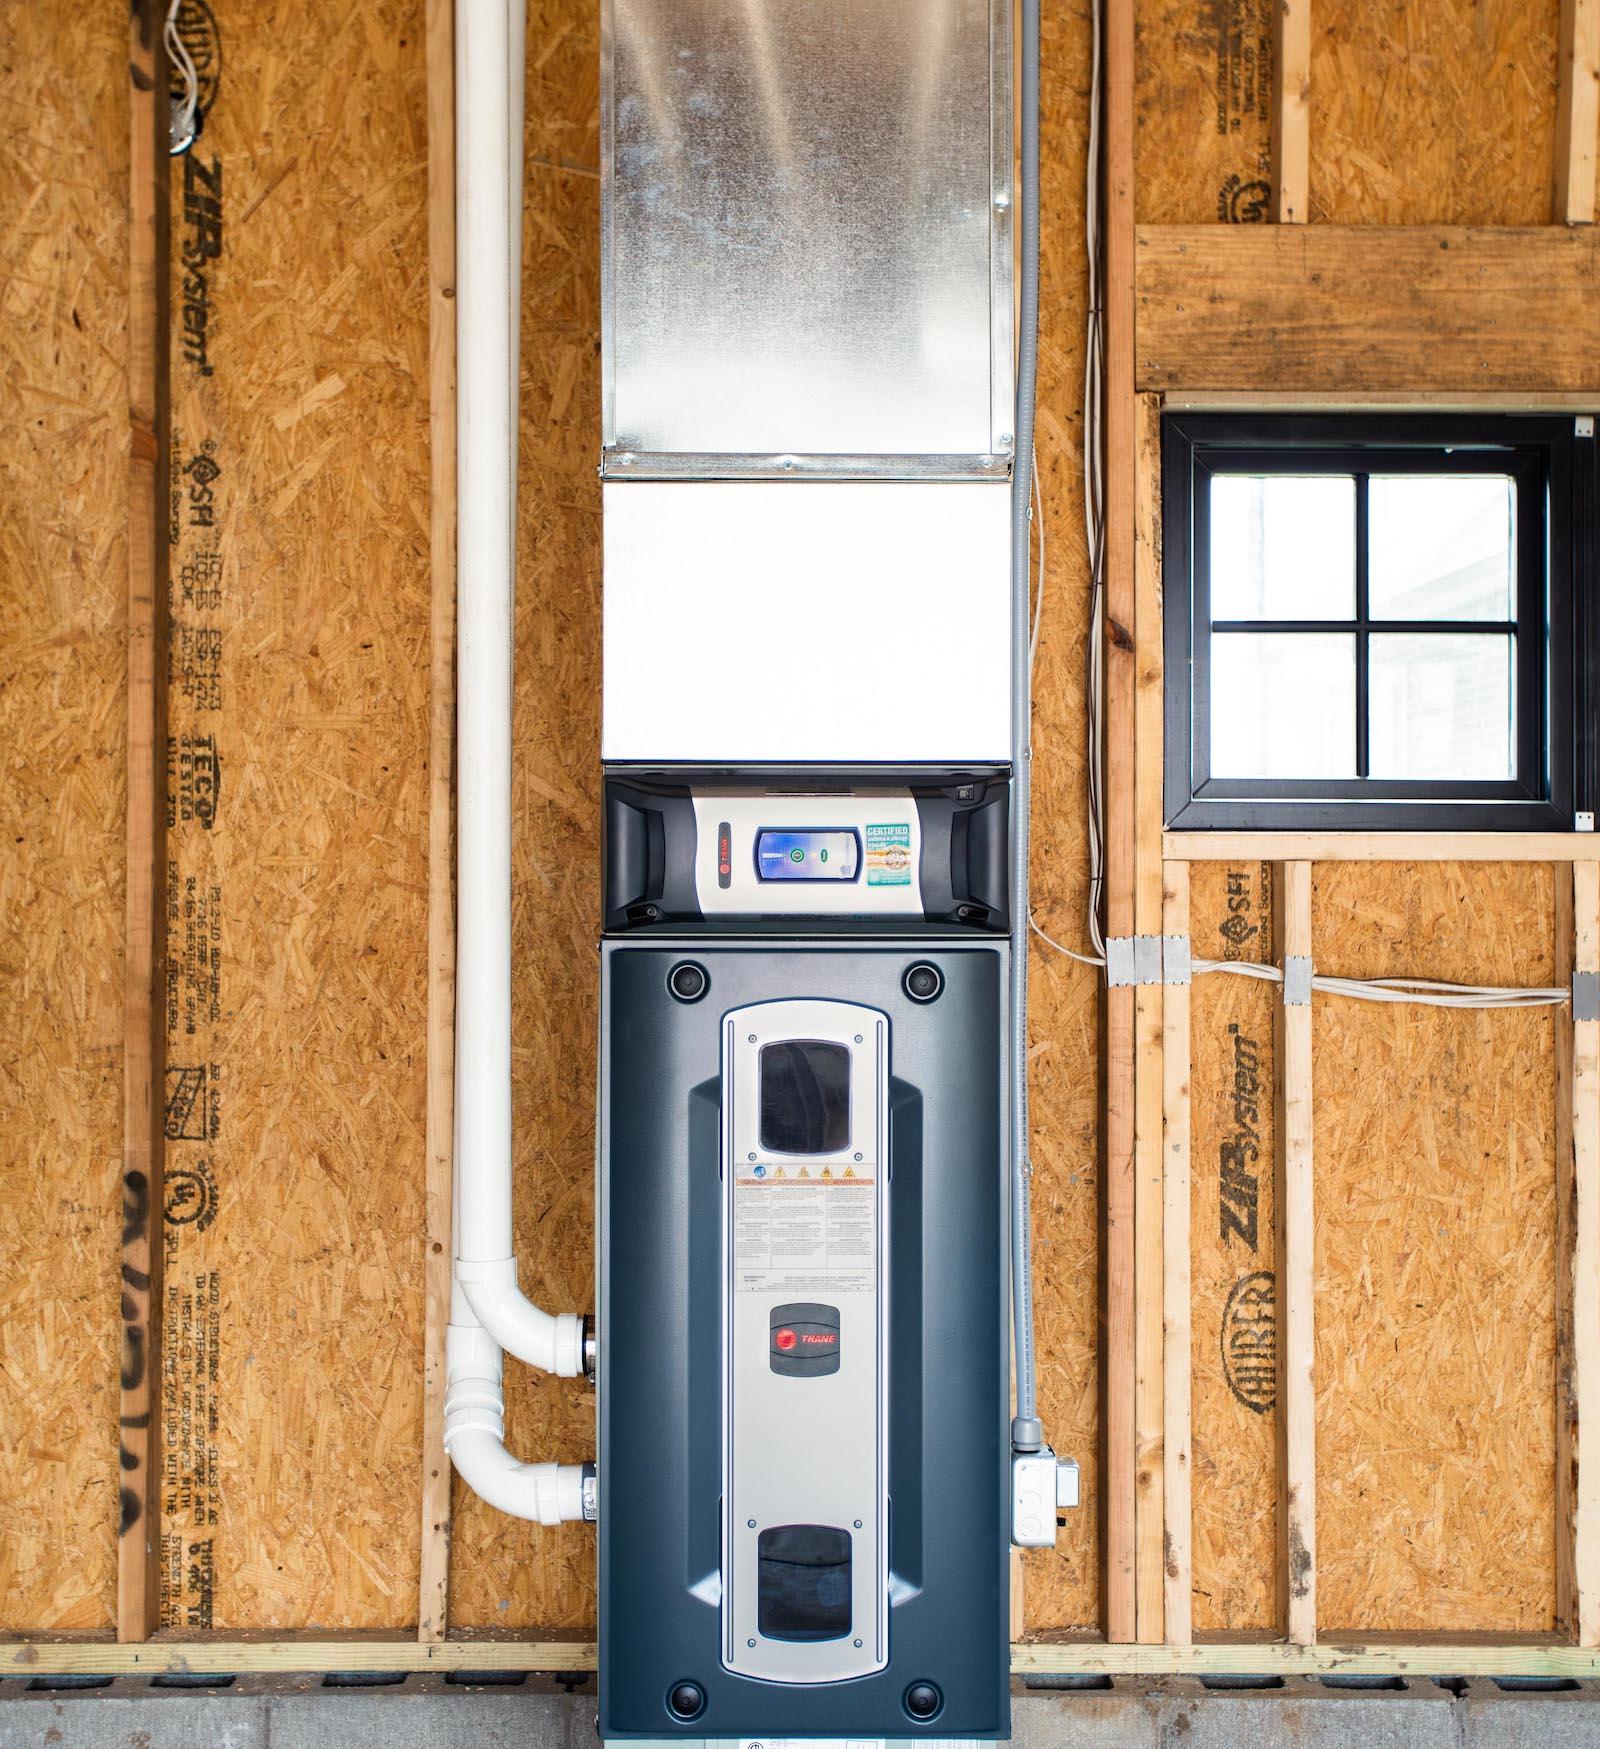 An air purification system and HVAC system are installed in an unfinished room.